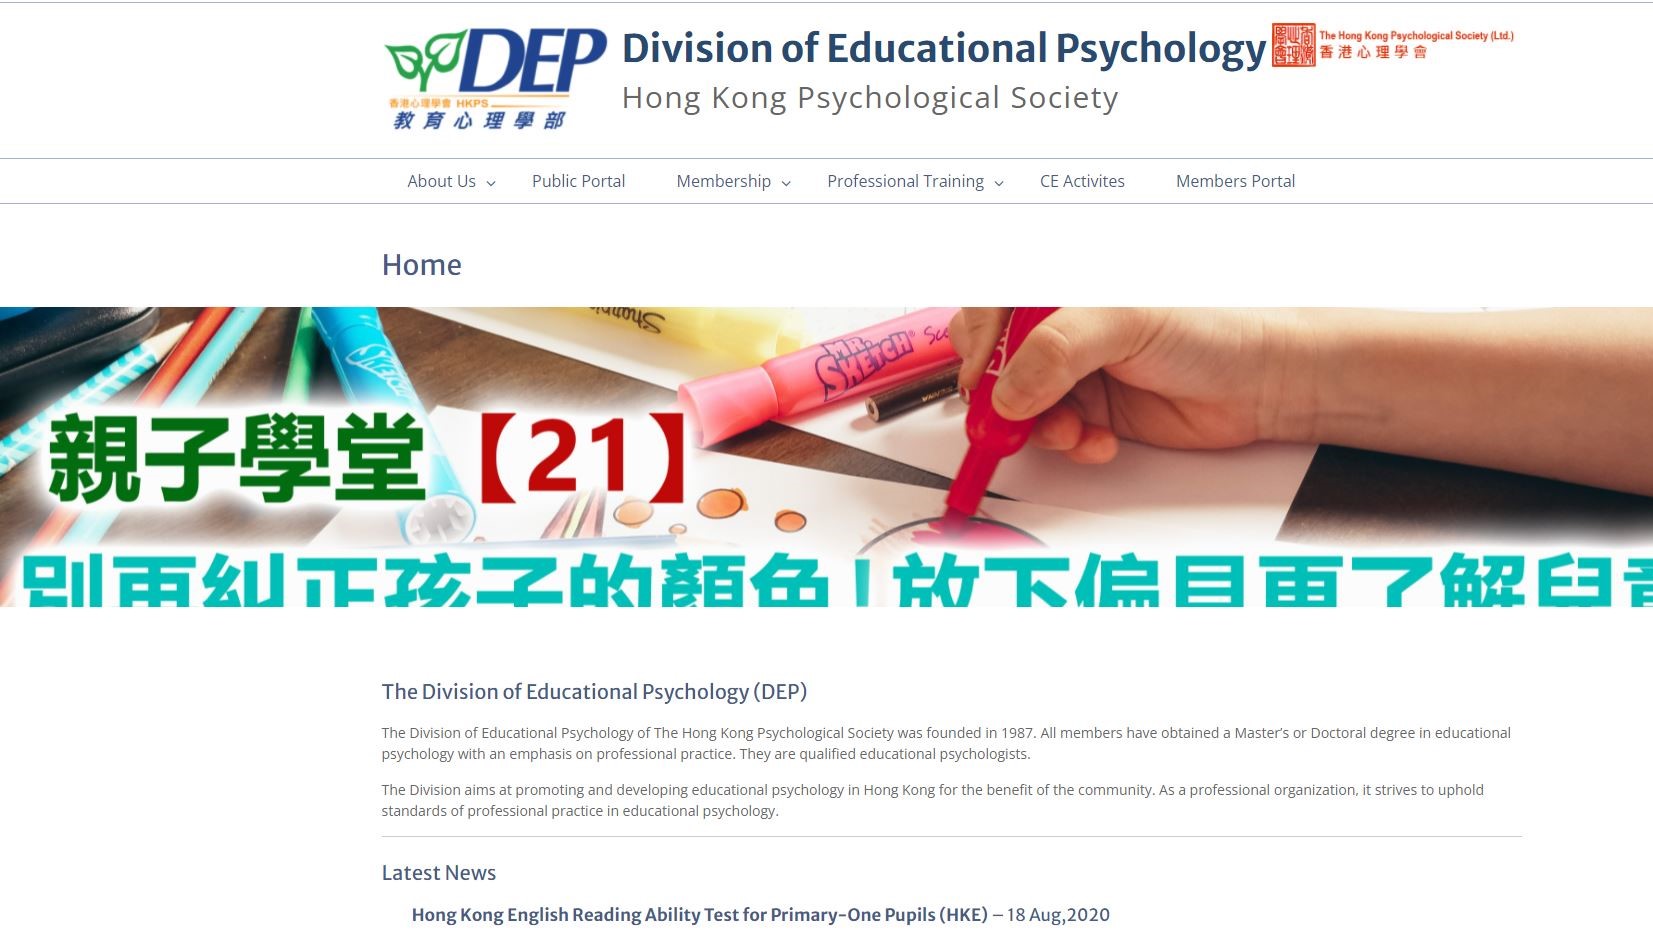 Division of Educational Psychology, Hong Kong Psychological Society：Resources for students in HK during COVID-19 period (Chinese Only)